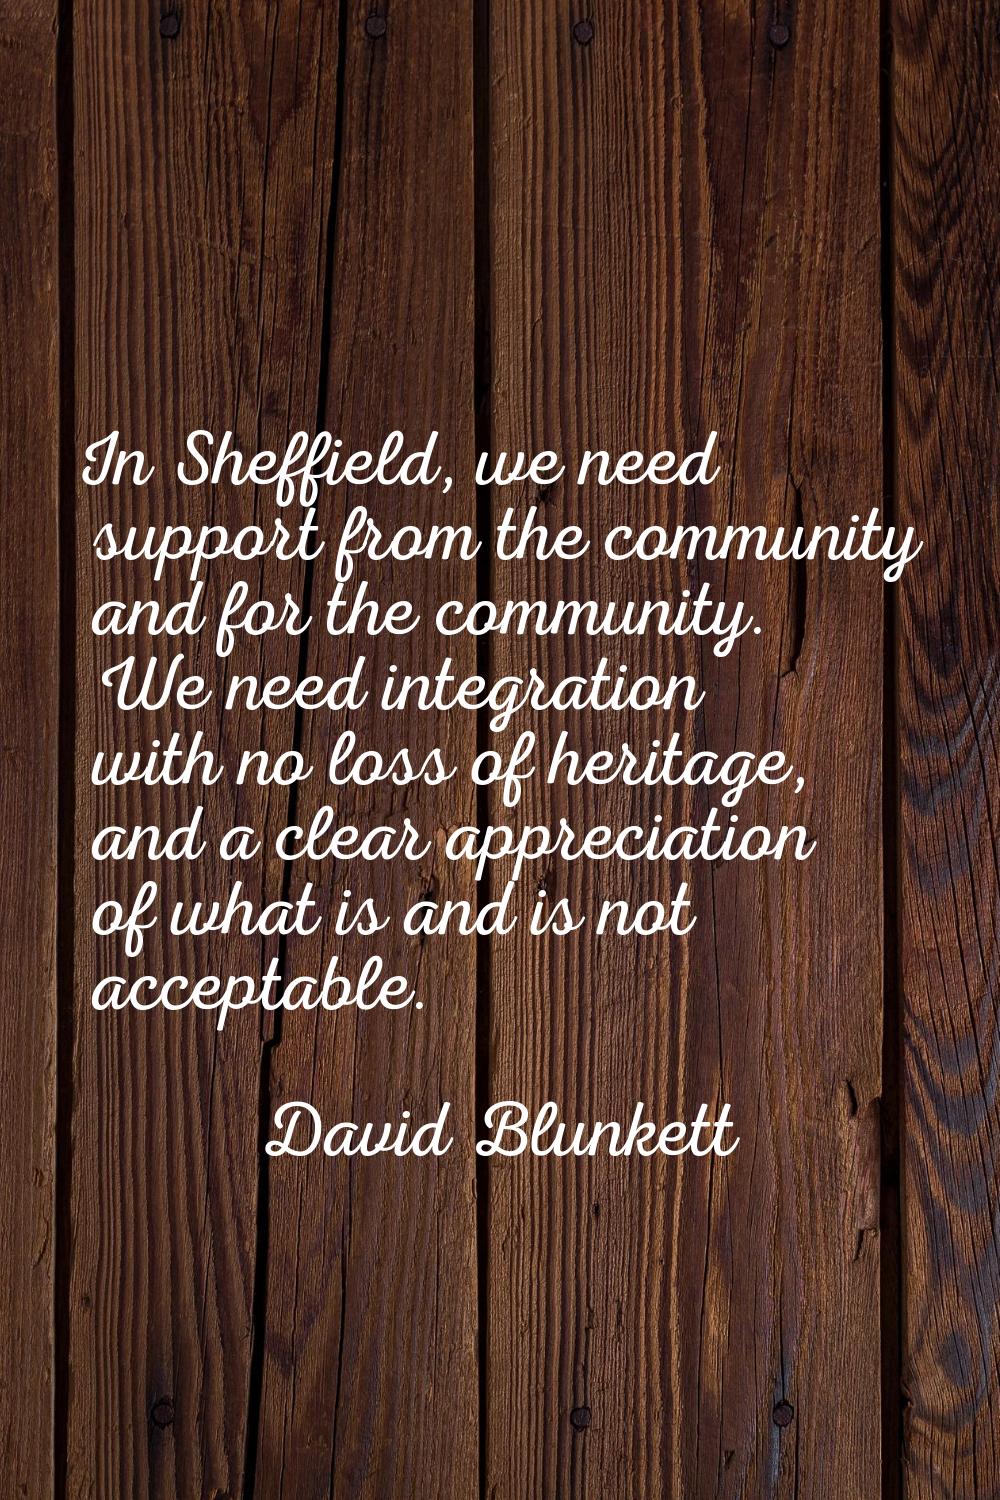 In Sheffield, we need support from the community and for the community. We need integration with no